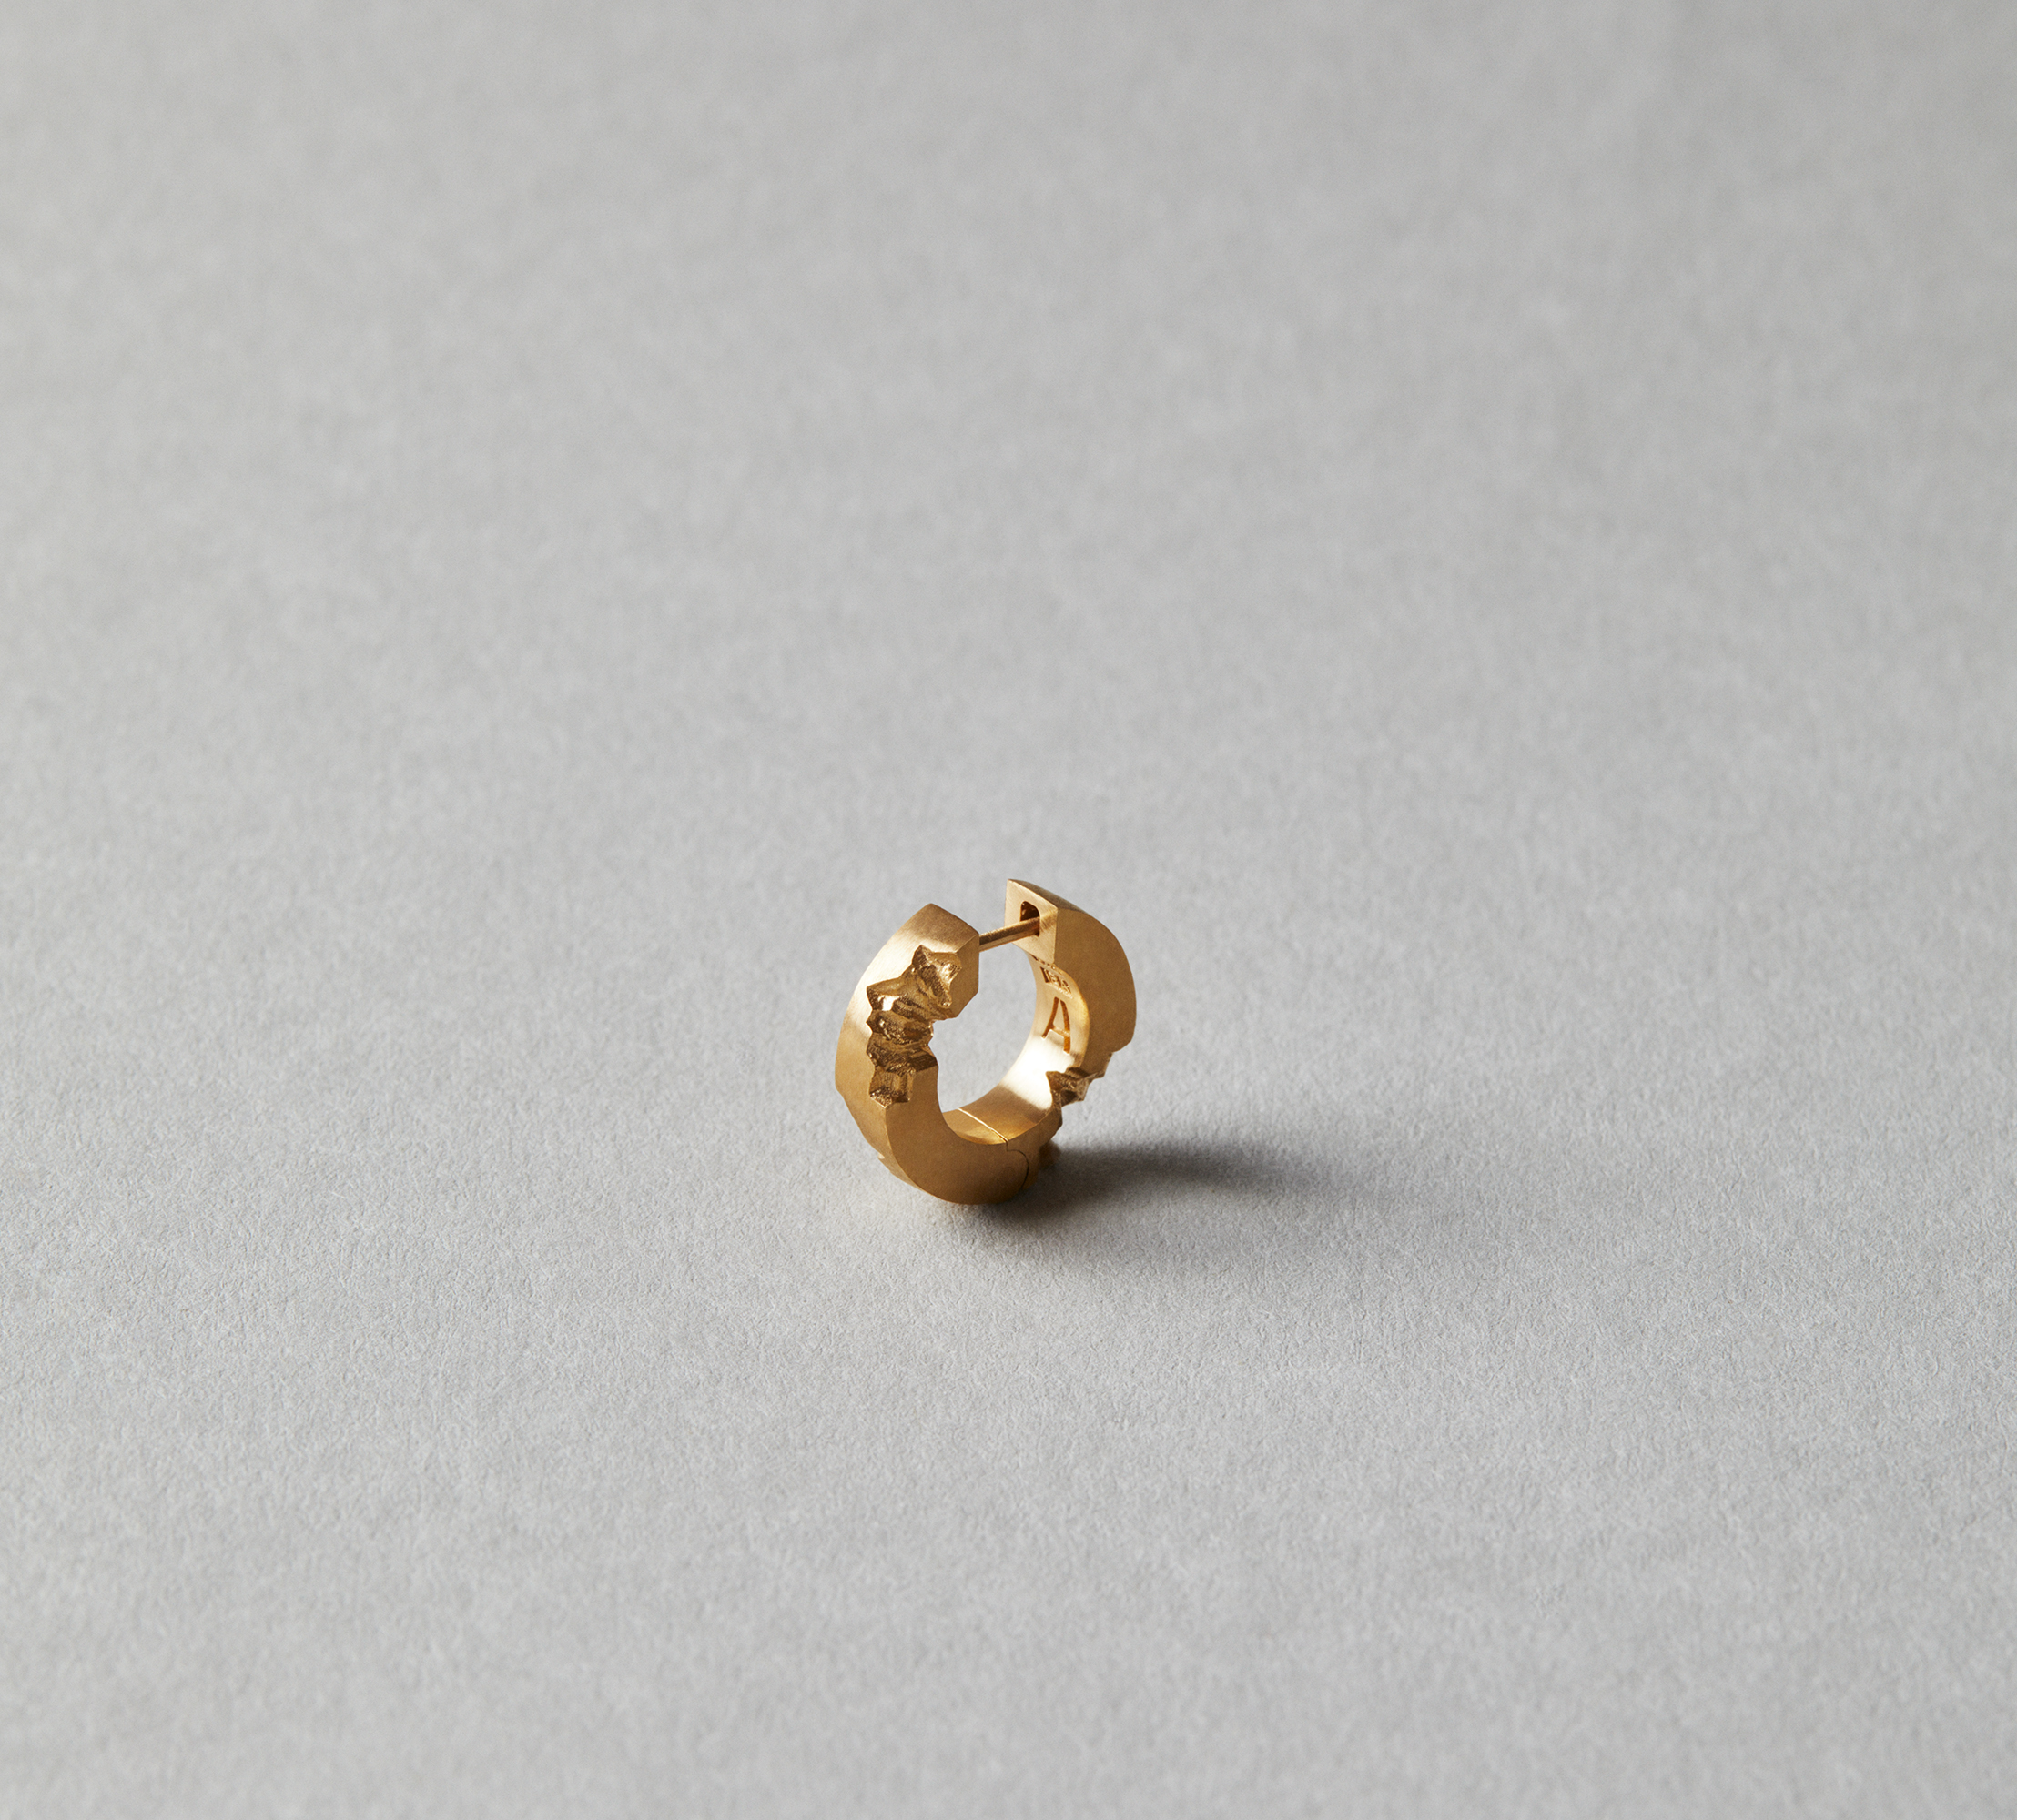 Round Cracked Earring Vermeil